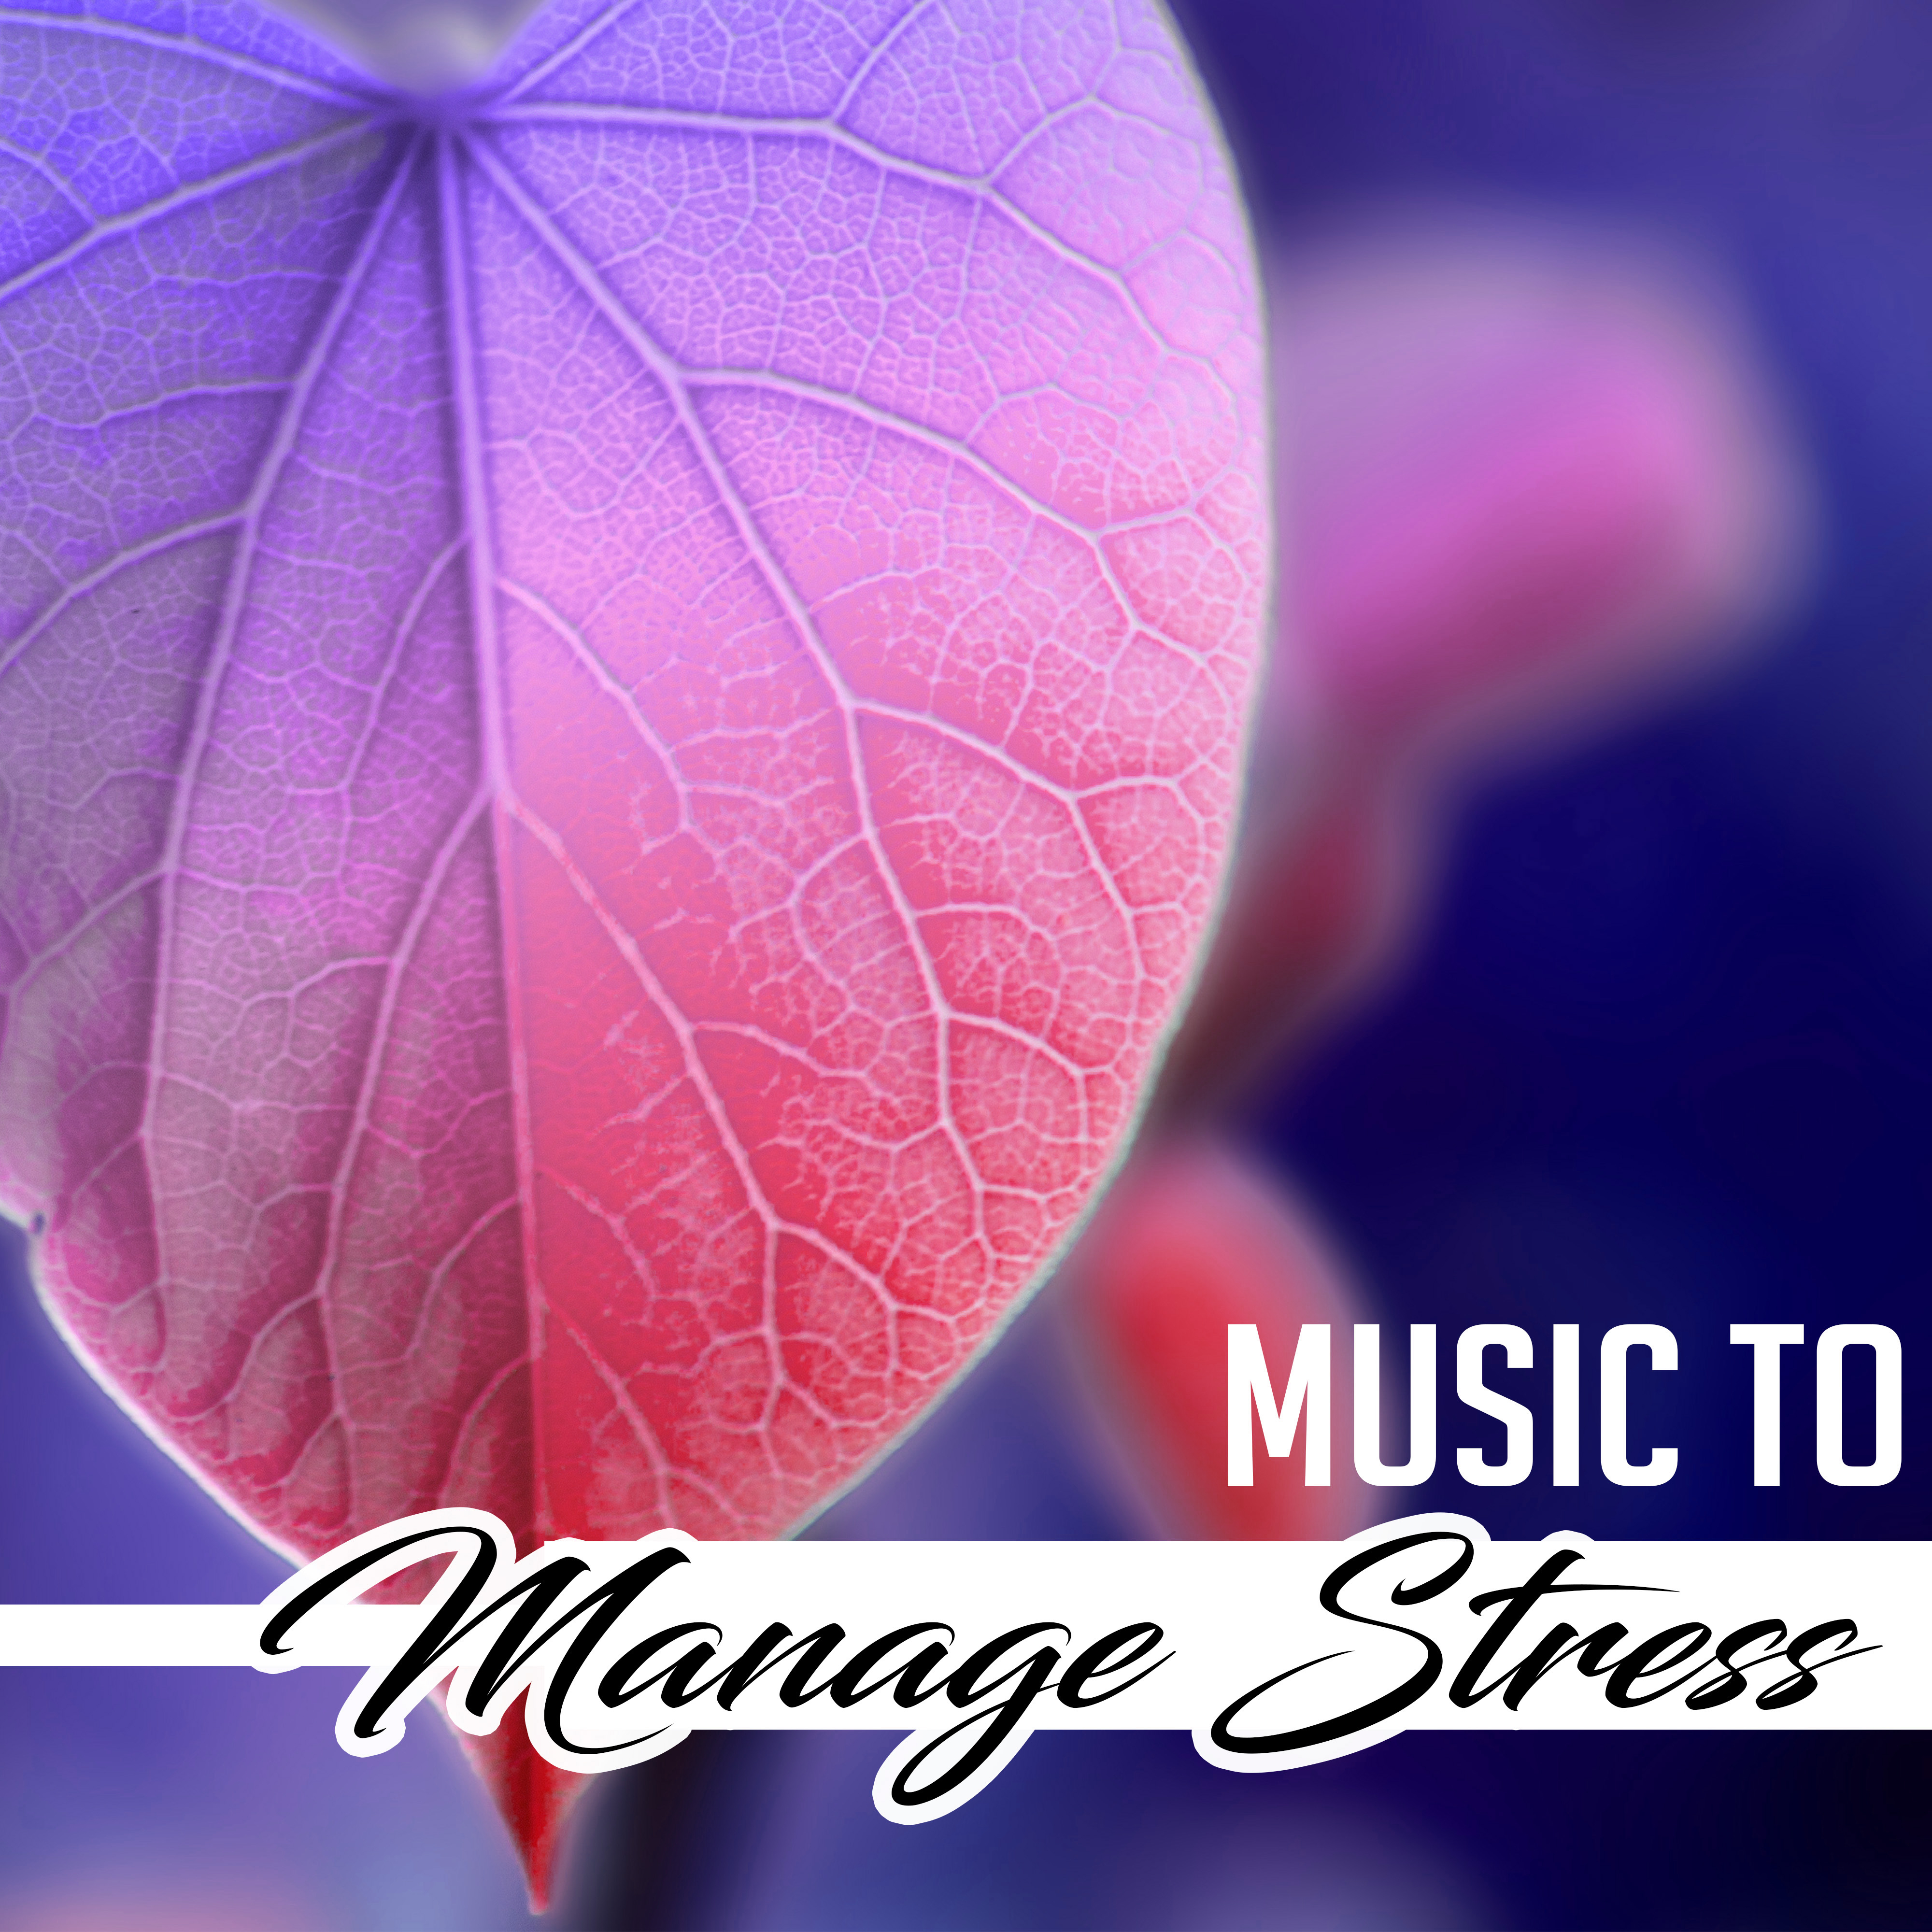 Music to Manage Stress – Relaxing Music for Stress Relief, Rest , Deep Relaxation, Calm Sounds of Nature, New Age